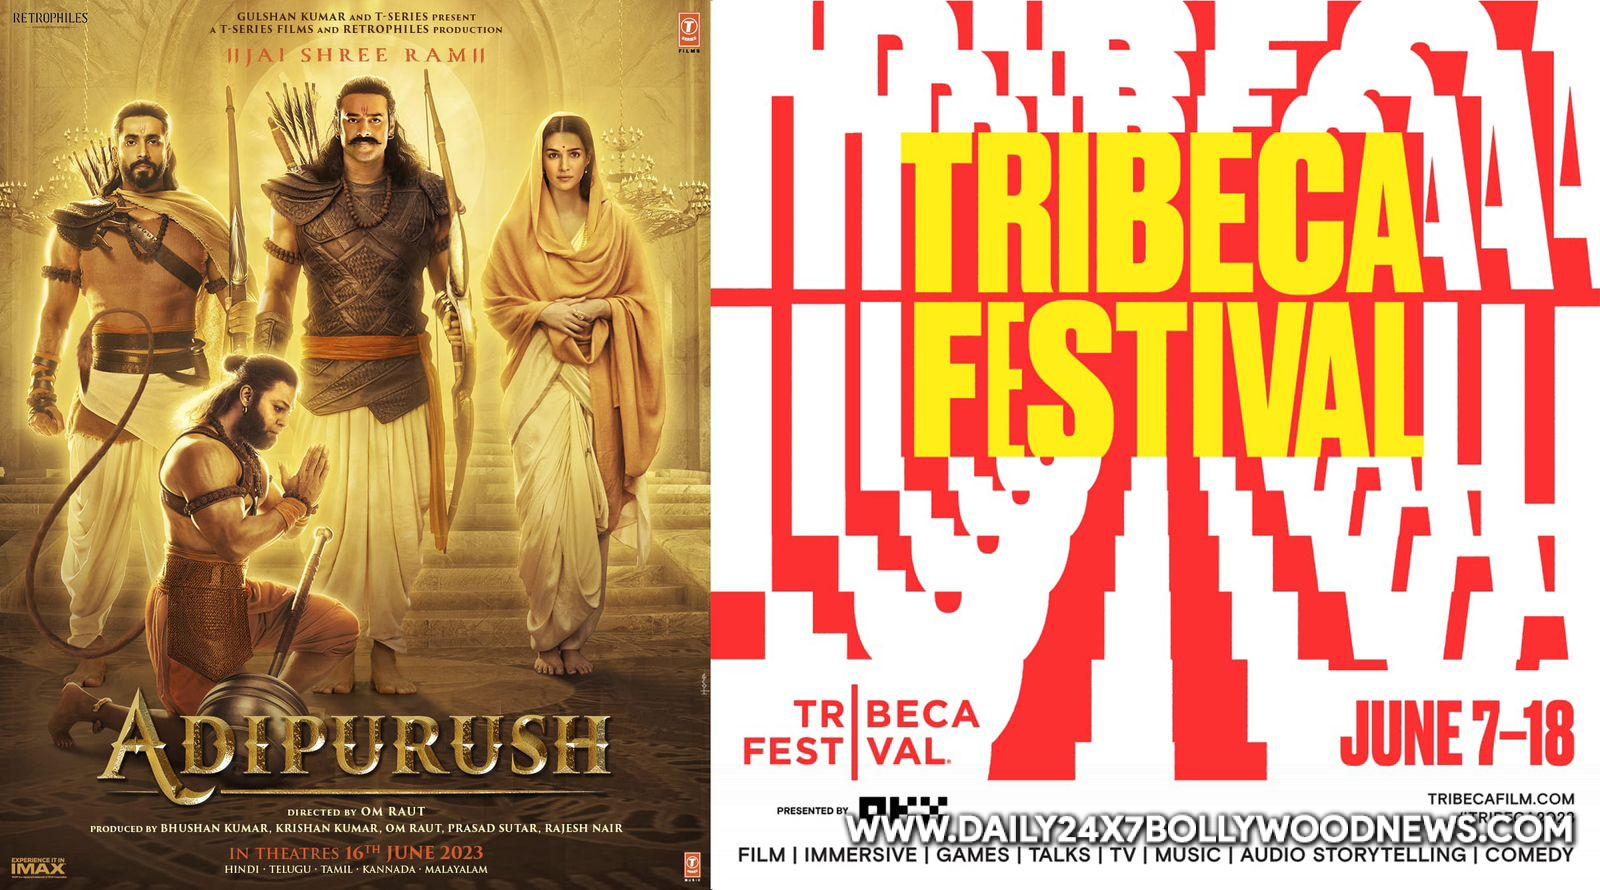 Breaking News!! Adipurush To Have Its World Premiere At The Prestigious Tribeca Festival In New York on June 13, 2023